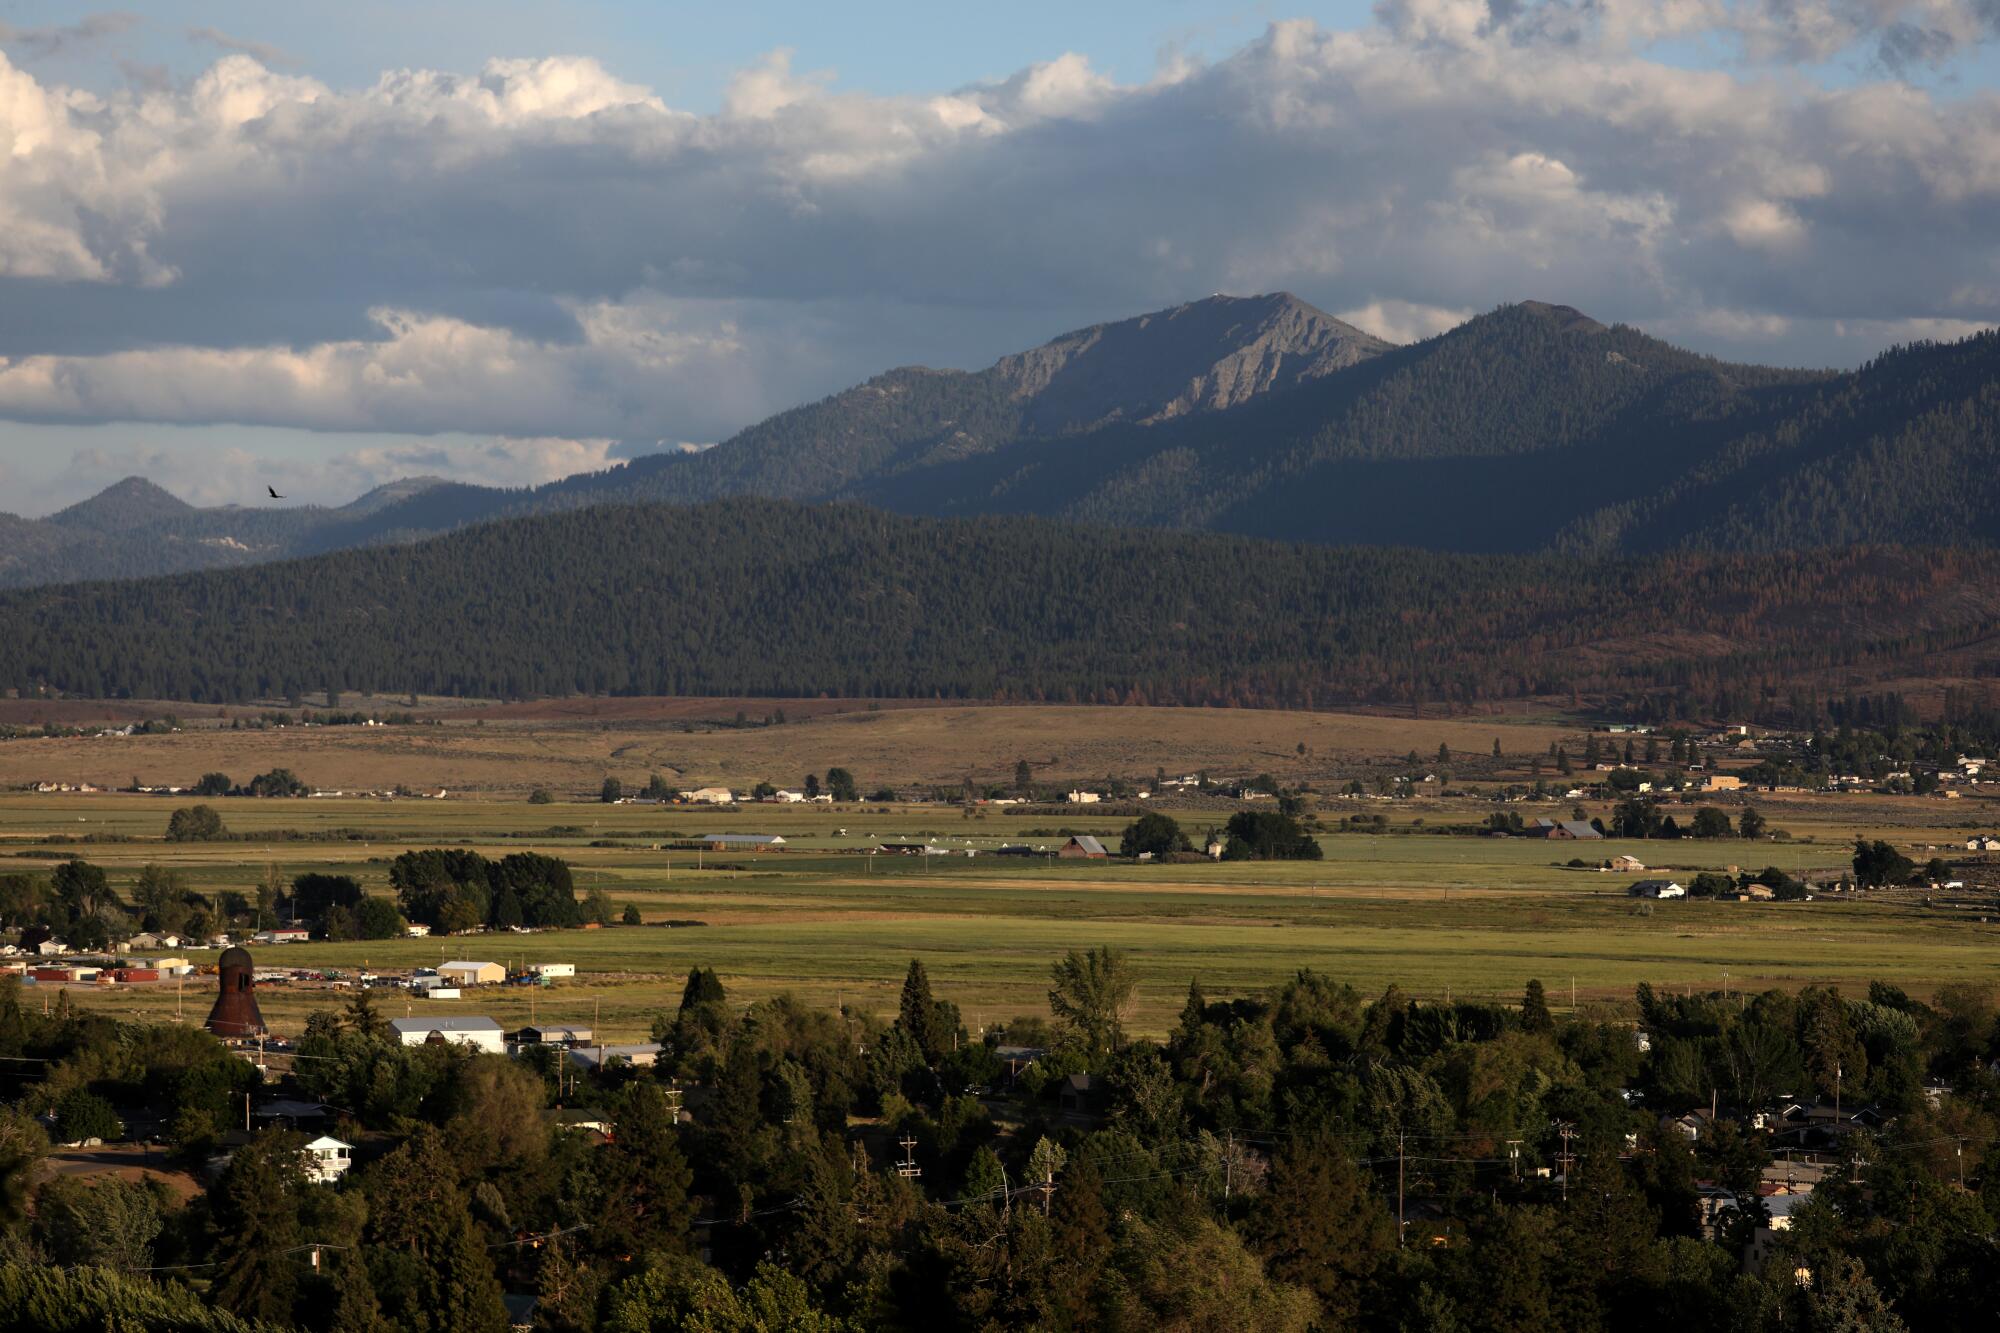 Diamond Mountain and the Honey Lake Basin can be seen from Inspiration Point in Susanville.